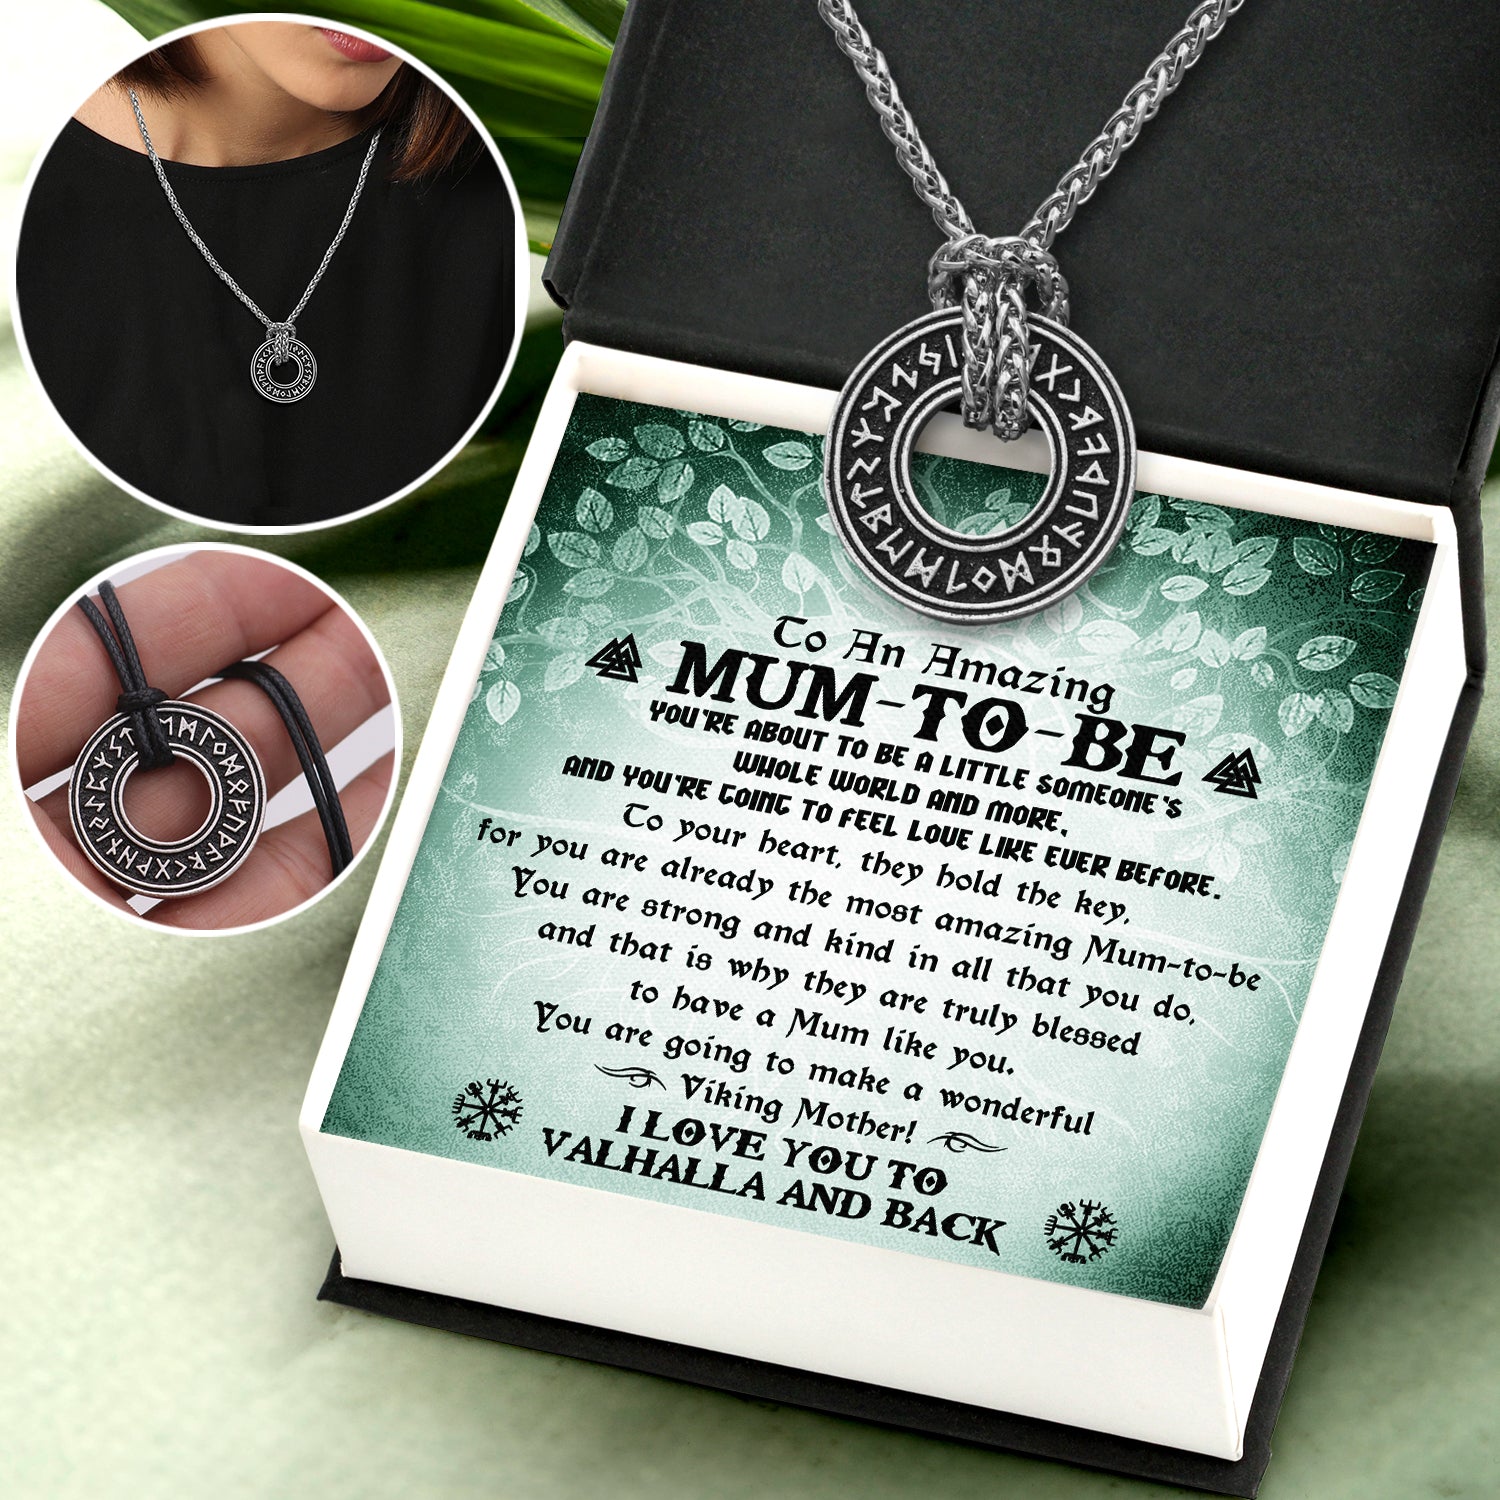 Viking Rune Necklace - Viking - To My Mum-to-be - I Love You To Valhalla And Back - Ukgndy19001